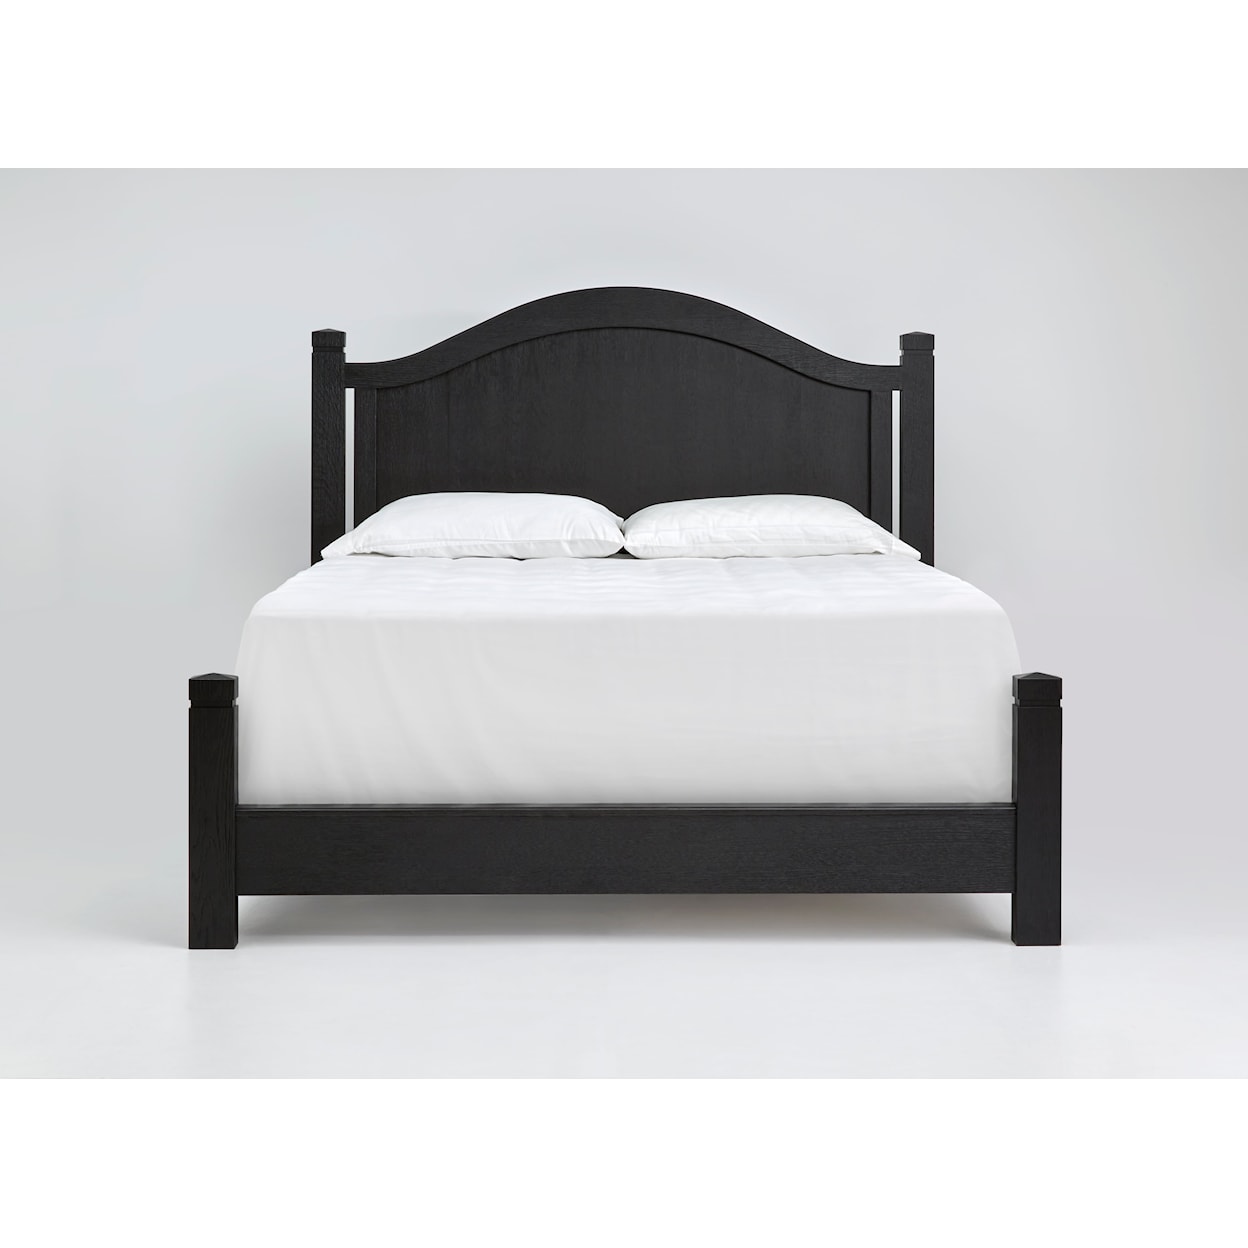 The Preserve Turner Queen Bed